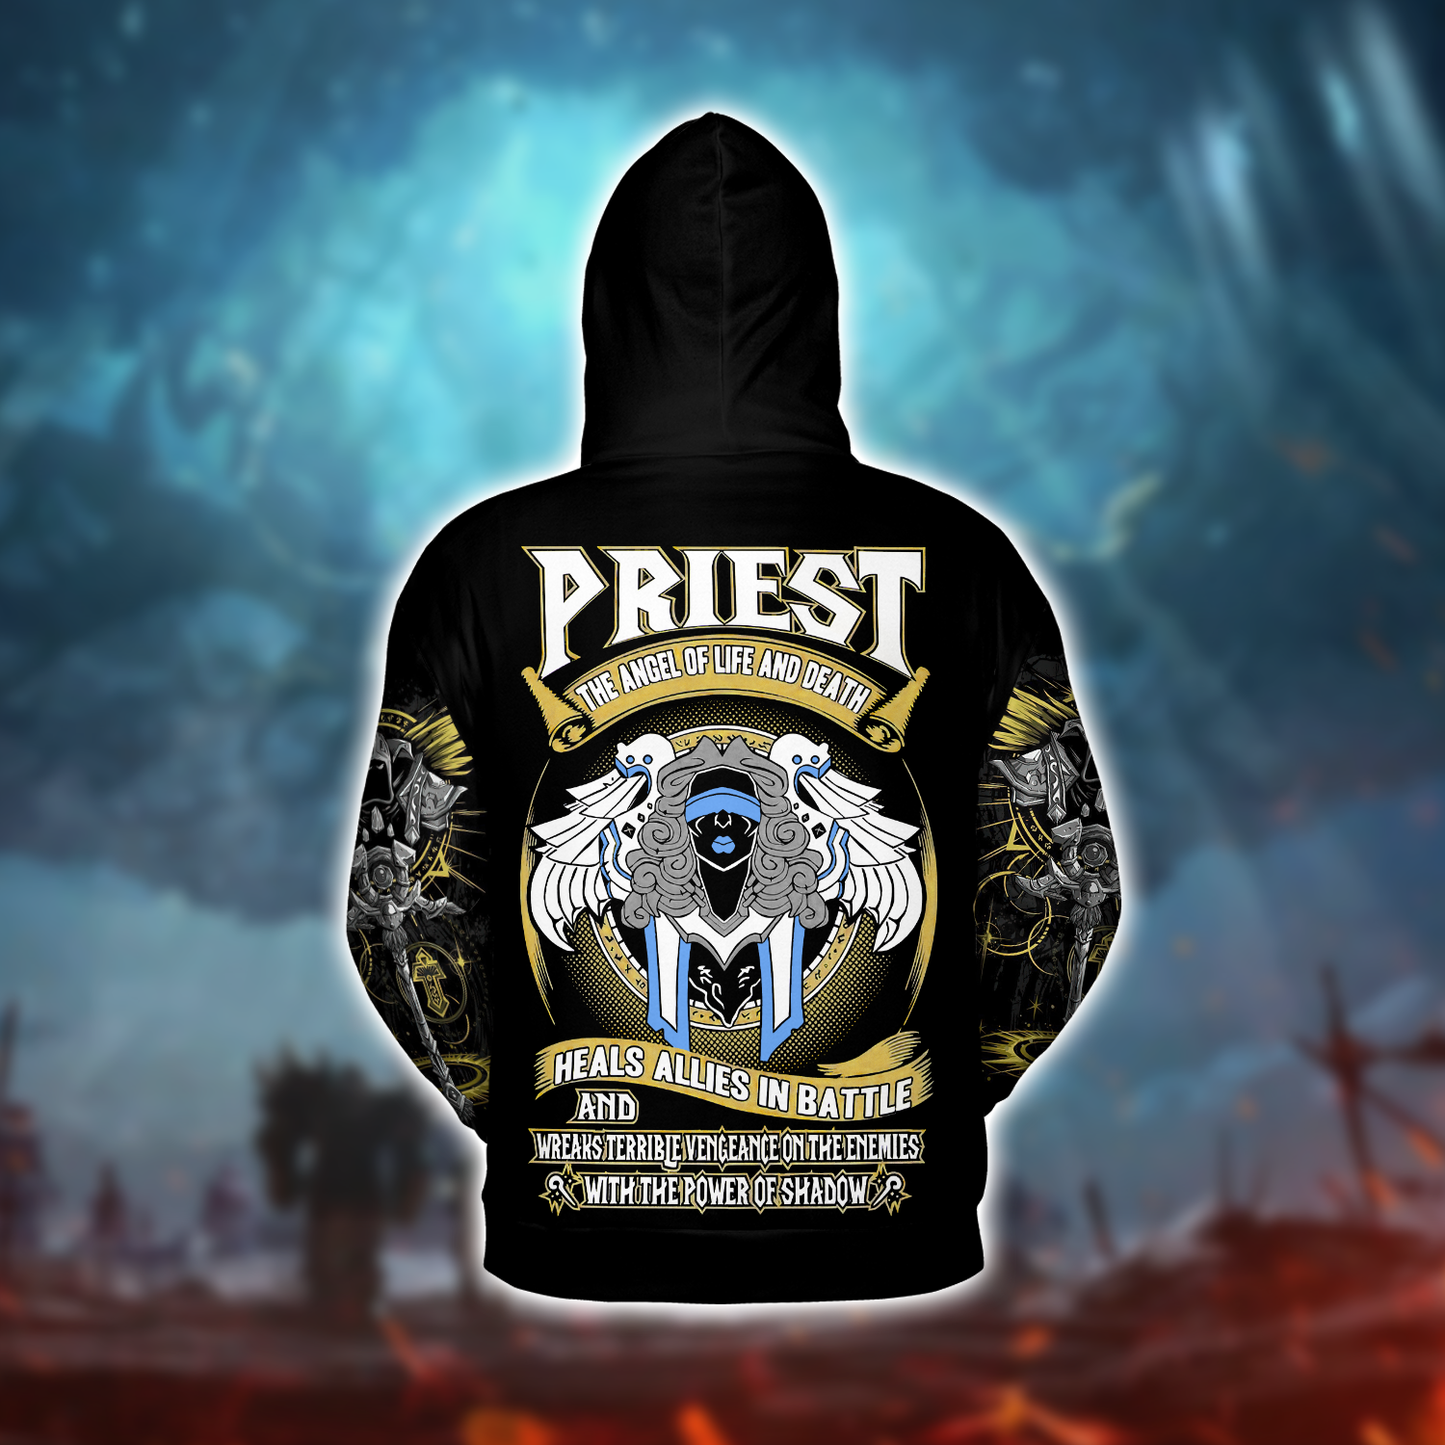 Priest - Invokers of Light and Darkness - WoW Class V5 AOP Hoodie